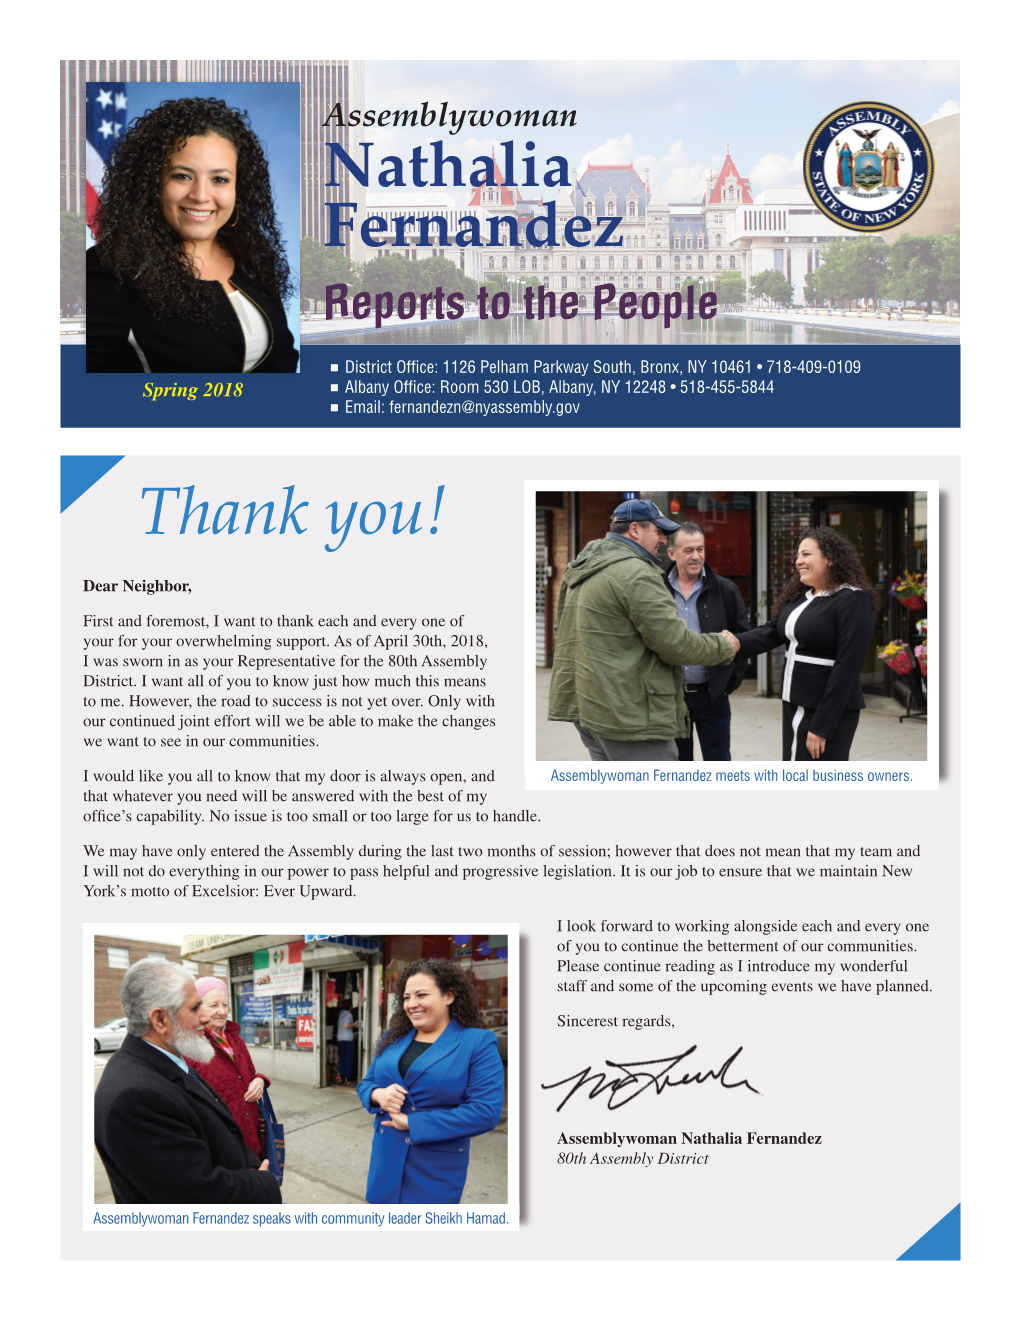 Nathalia Fernandez Reports to the People